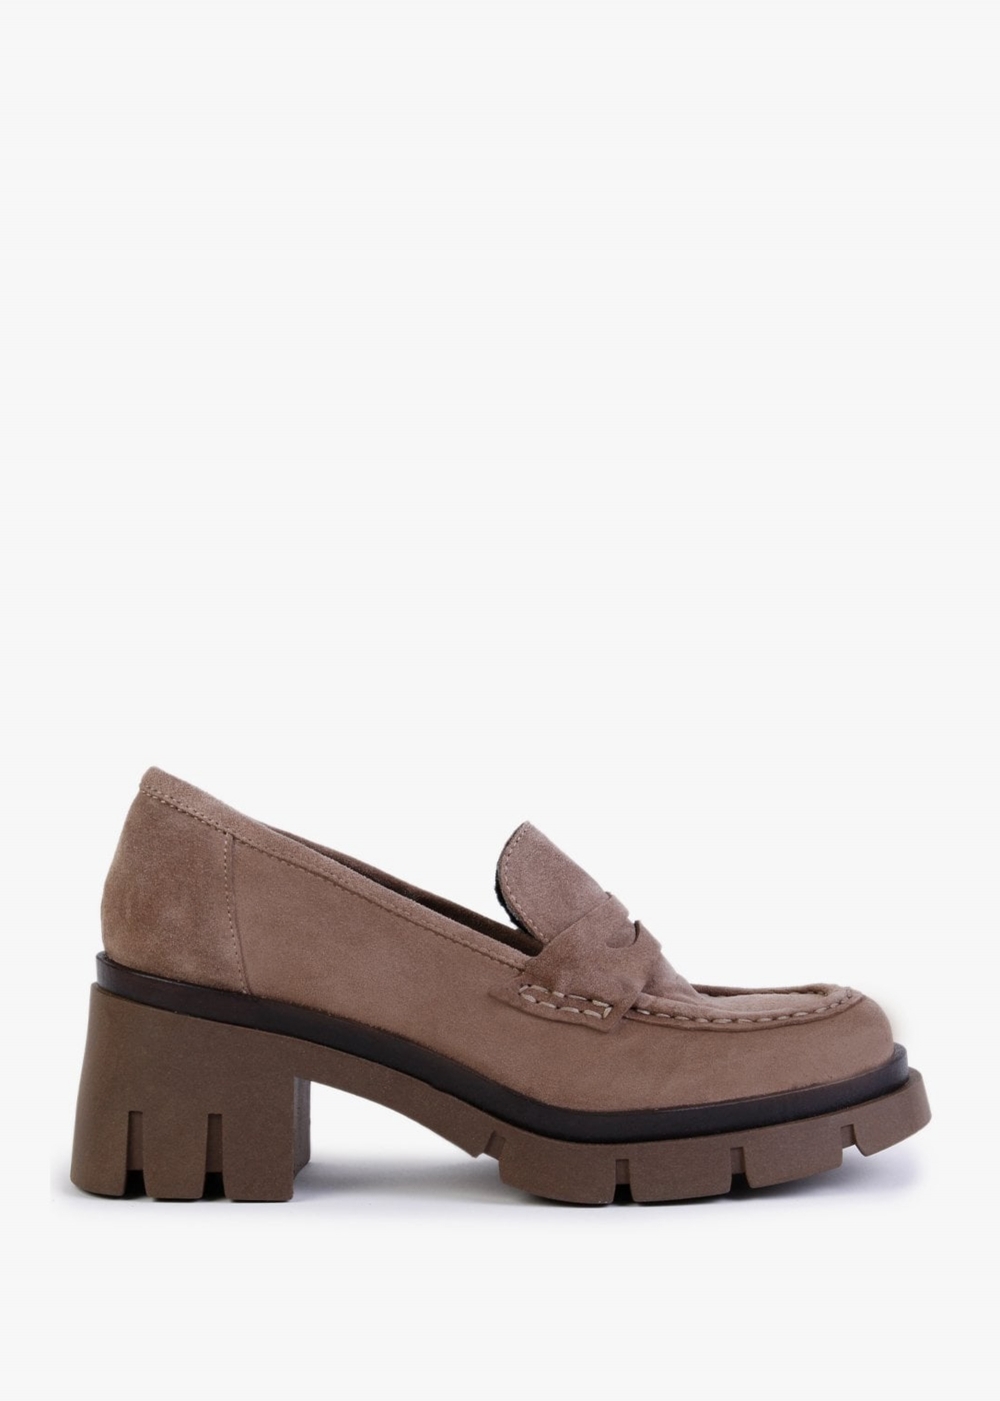 DANIEL Luckyloaf Taupe Suede Chunky Loafers Size: 36